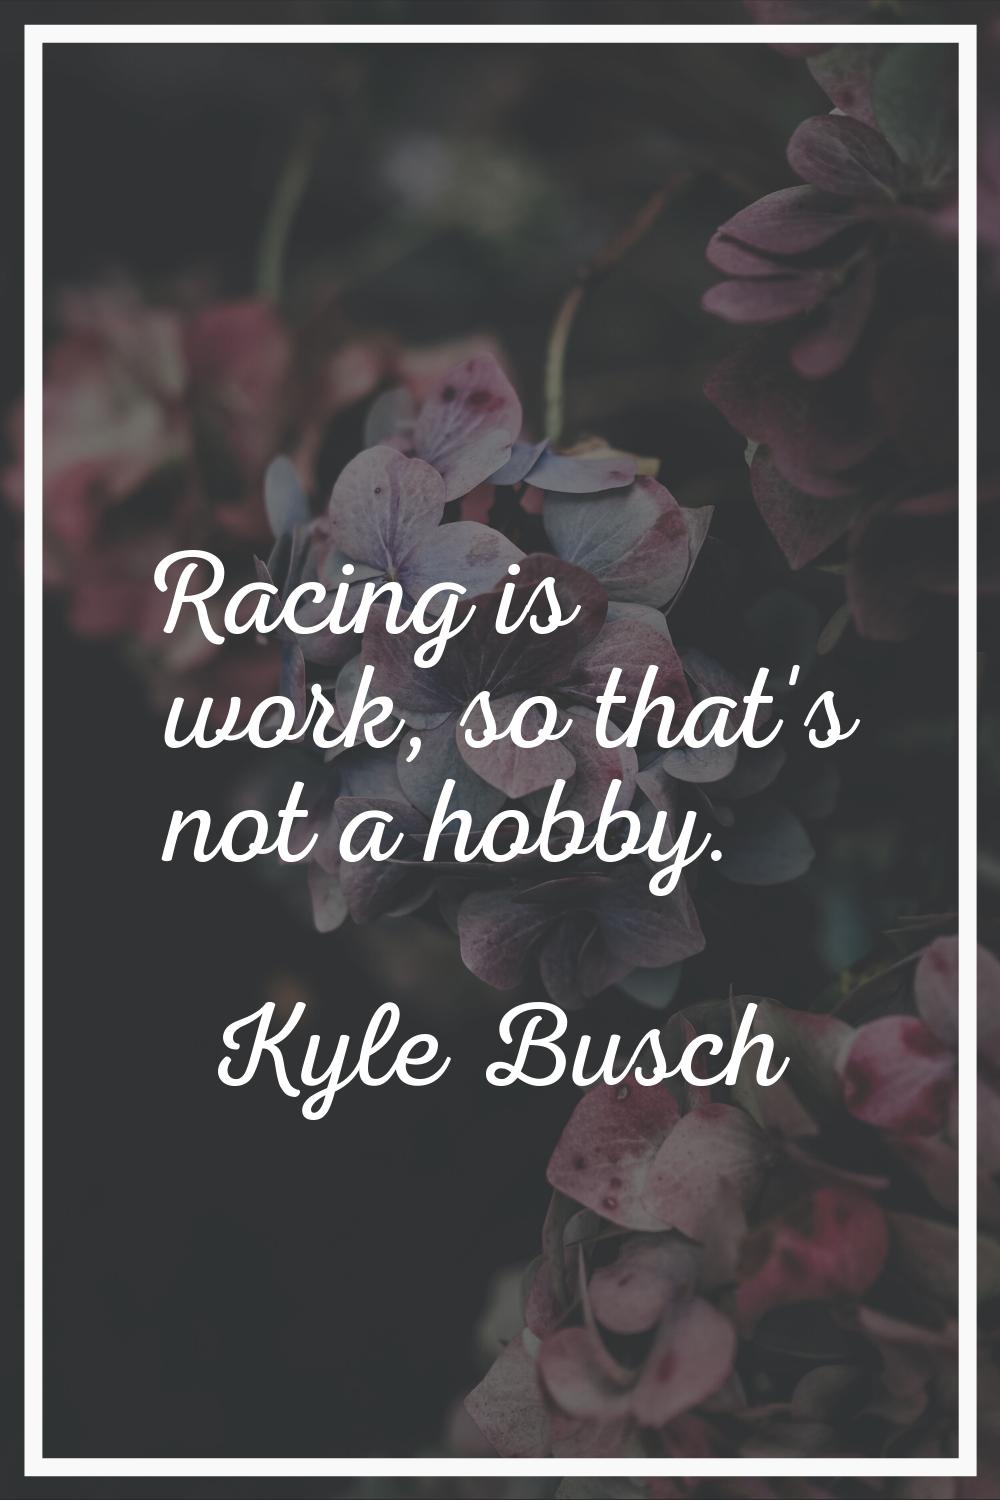 Racing is work, so that's not a hobby.